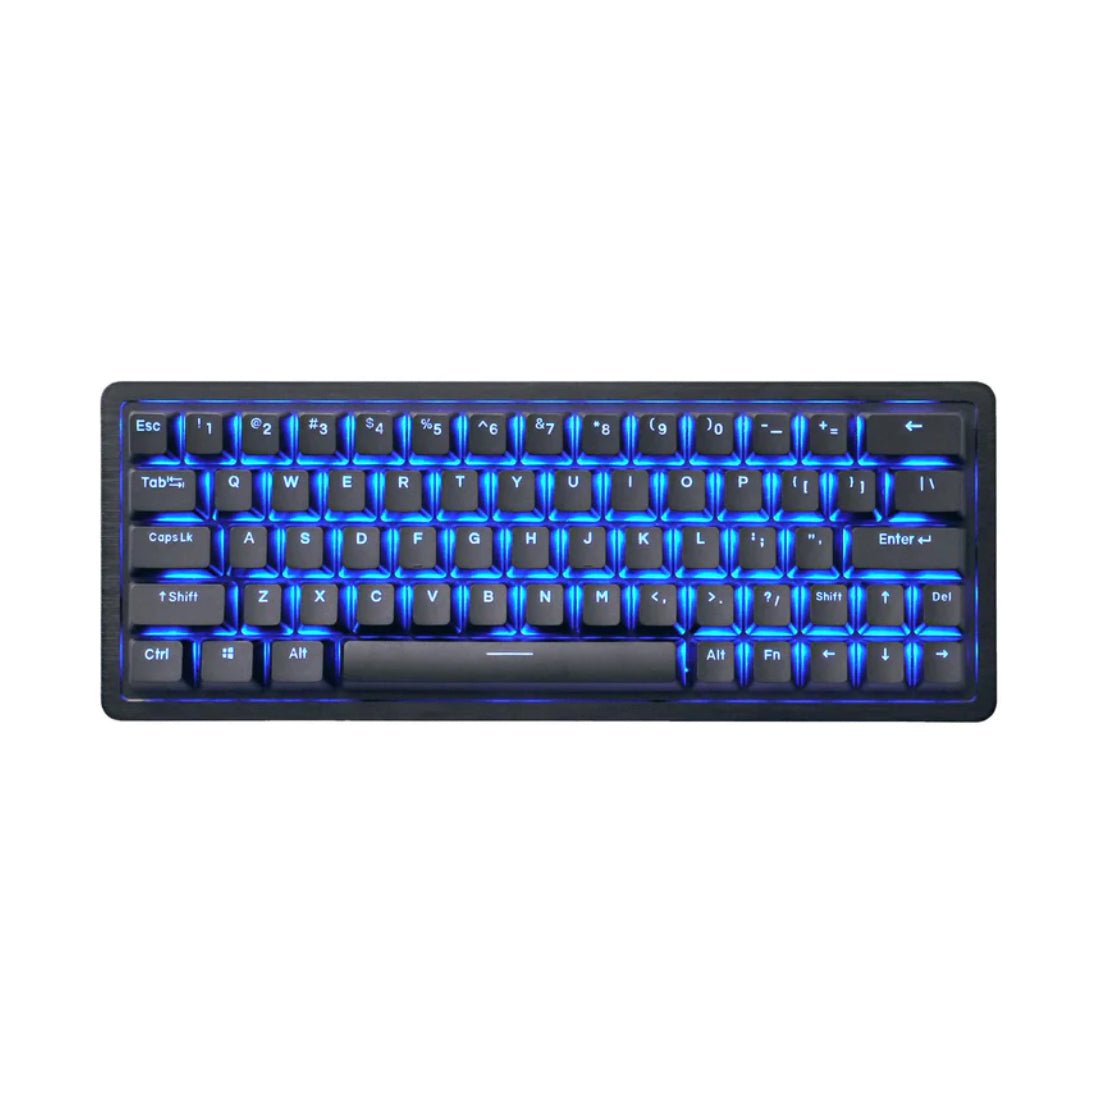 Mountain Everest 60 Linear 45 Speed Switch Mechanical Gaming Keyboard - Black - Store 974 | ستور ٩٧٤